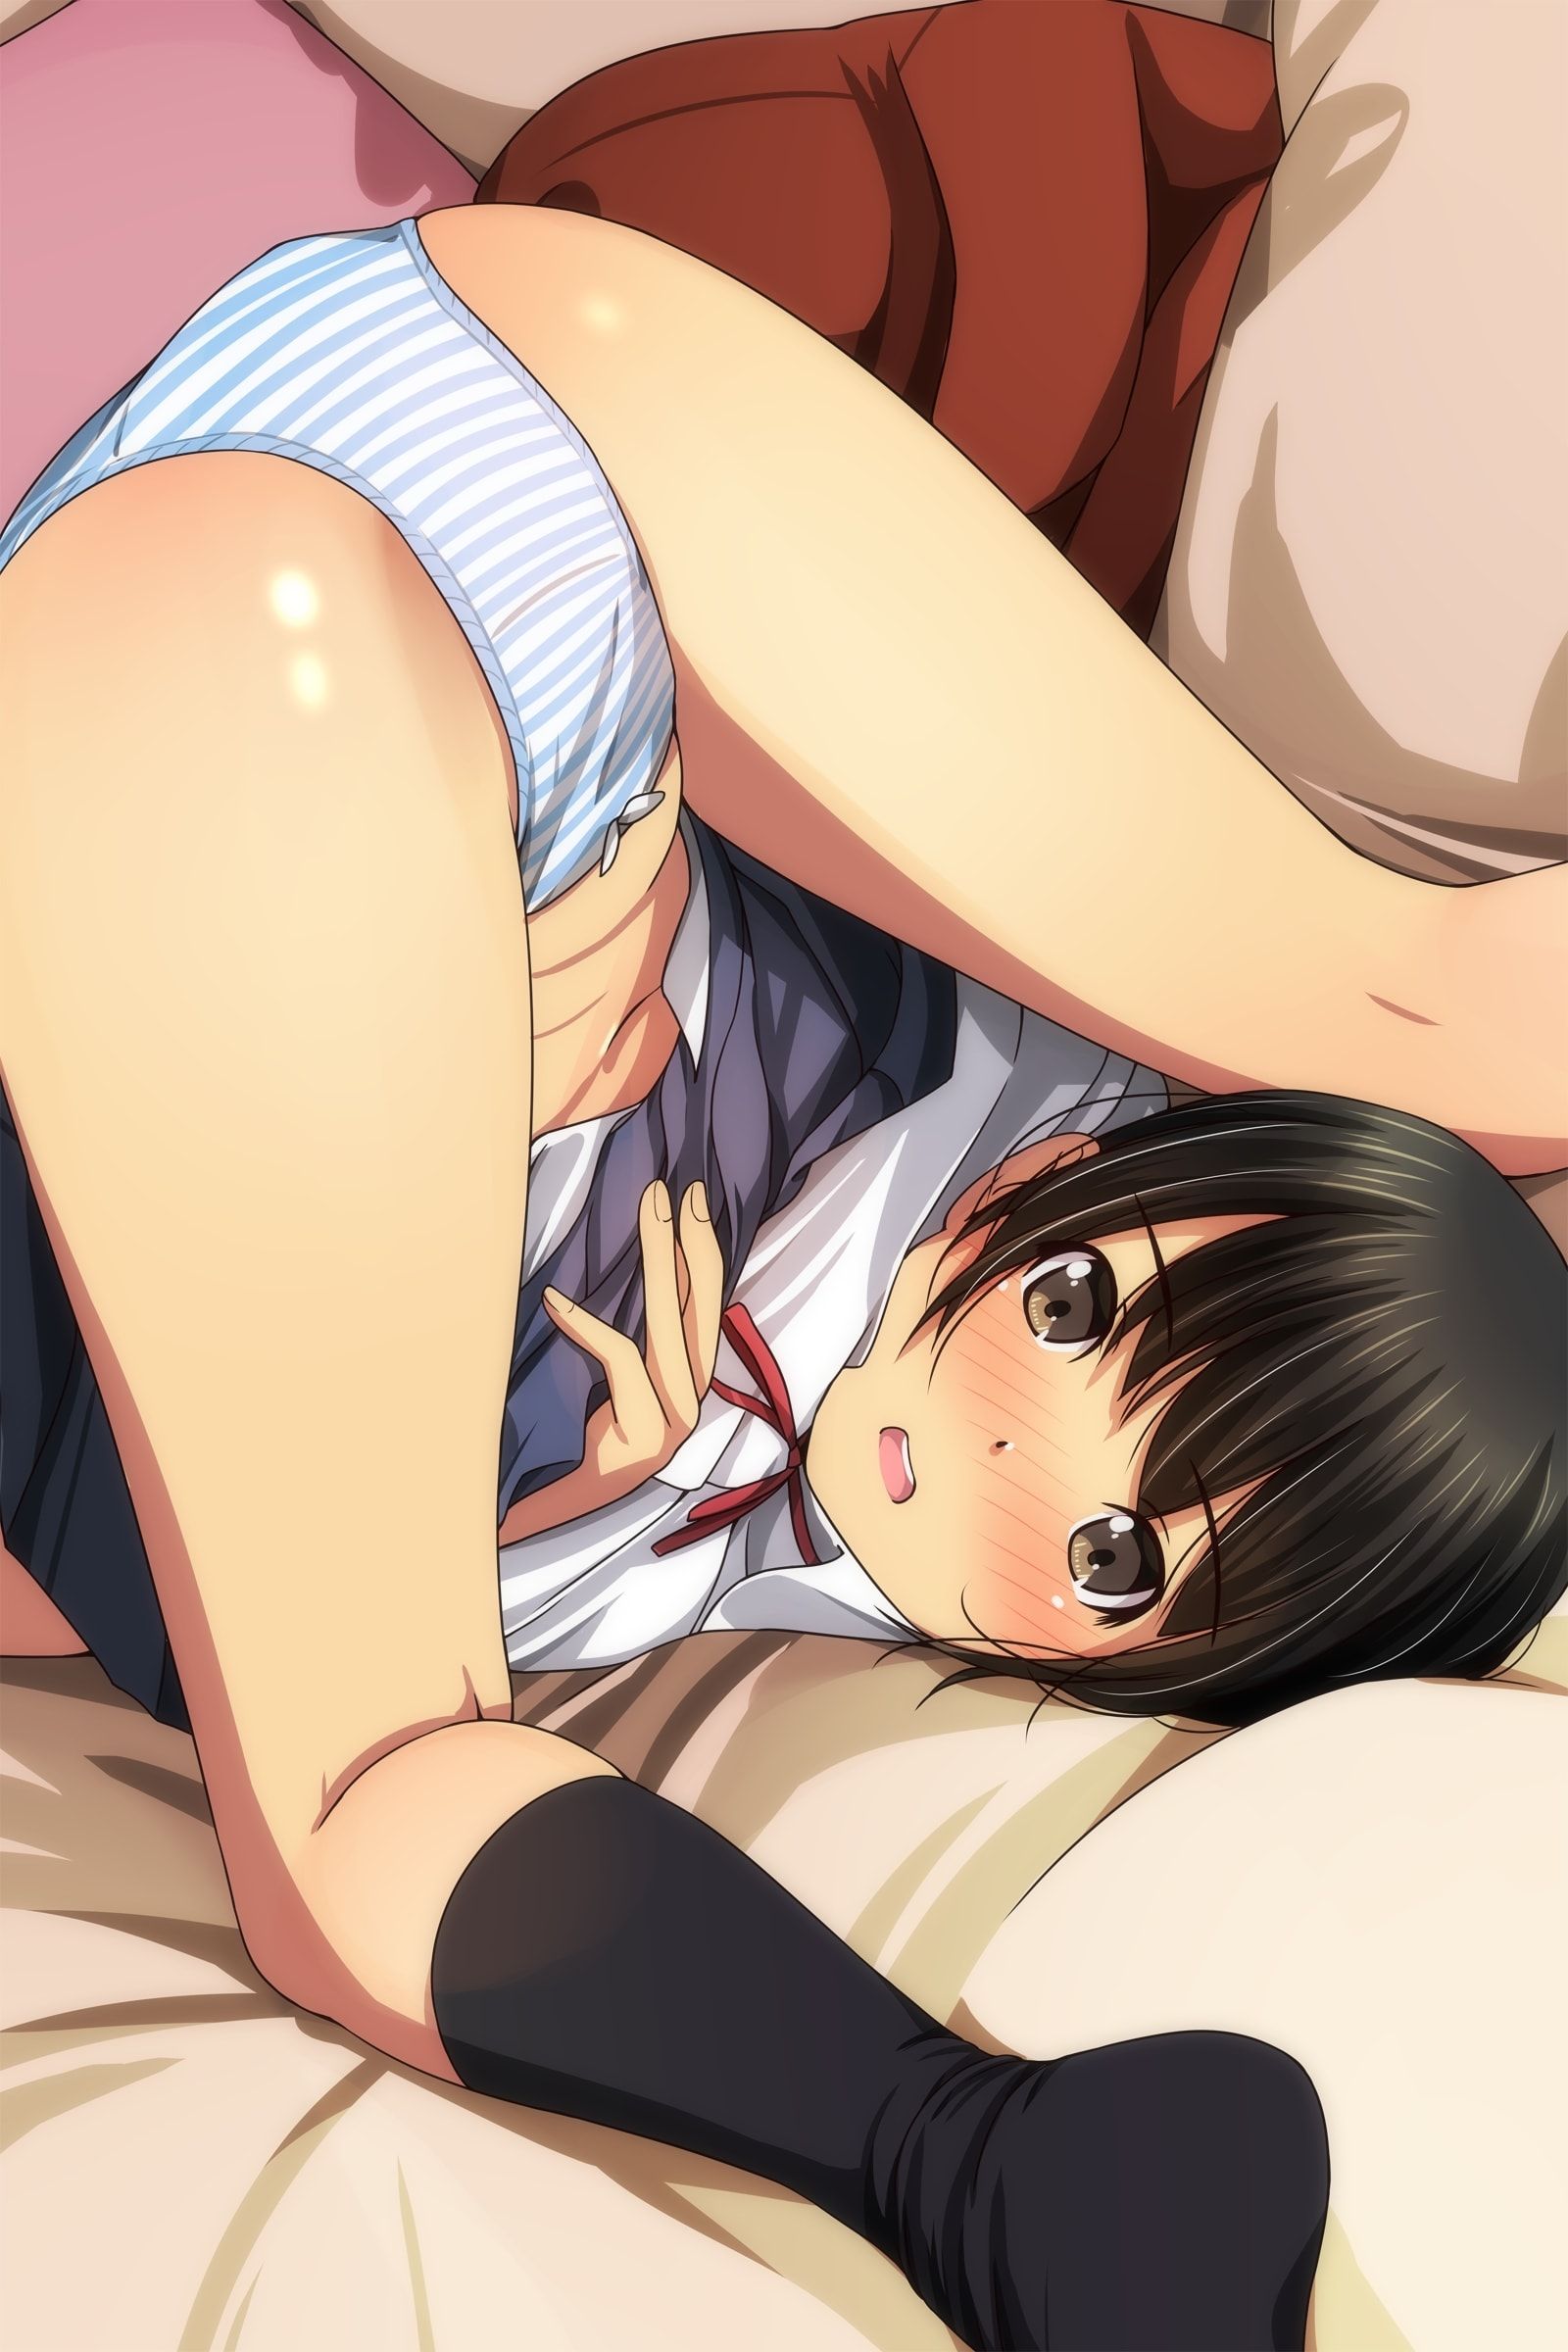 [Lori pants image] Loli pants secondary erotic image to become energetic on the weekend you want to spend looking at the cute pants of the secondary Loli girl 27